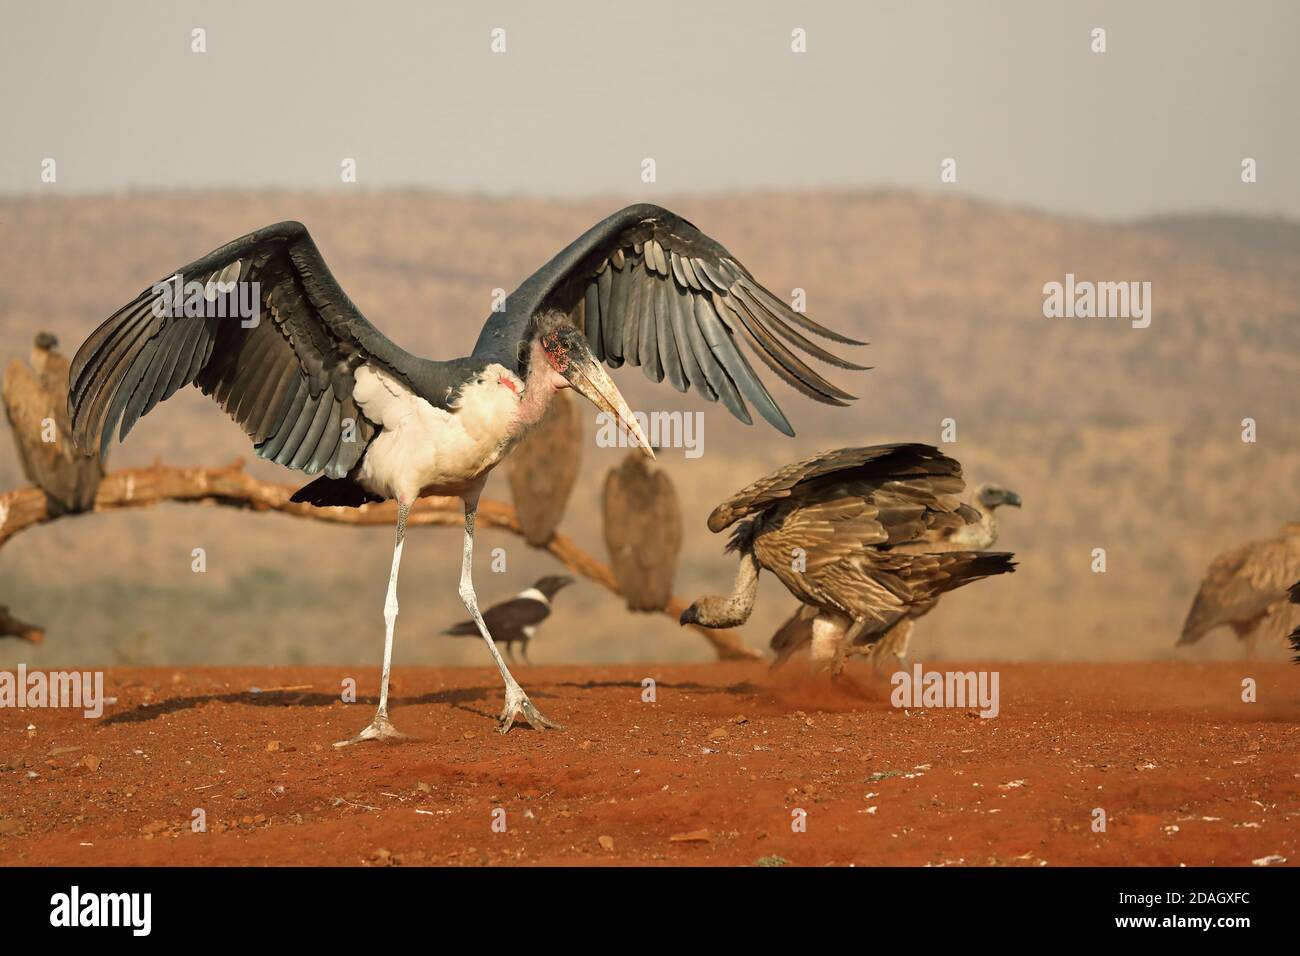 marabou stork (Leptoptilos crumeniferus), young bird walks flapping wings at the feeding place, vultures in the background, South Africa, Stock Photo